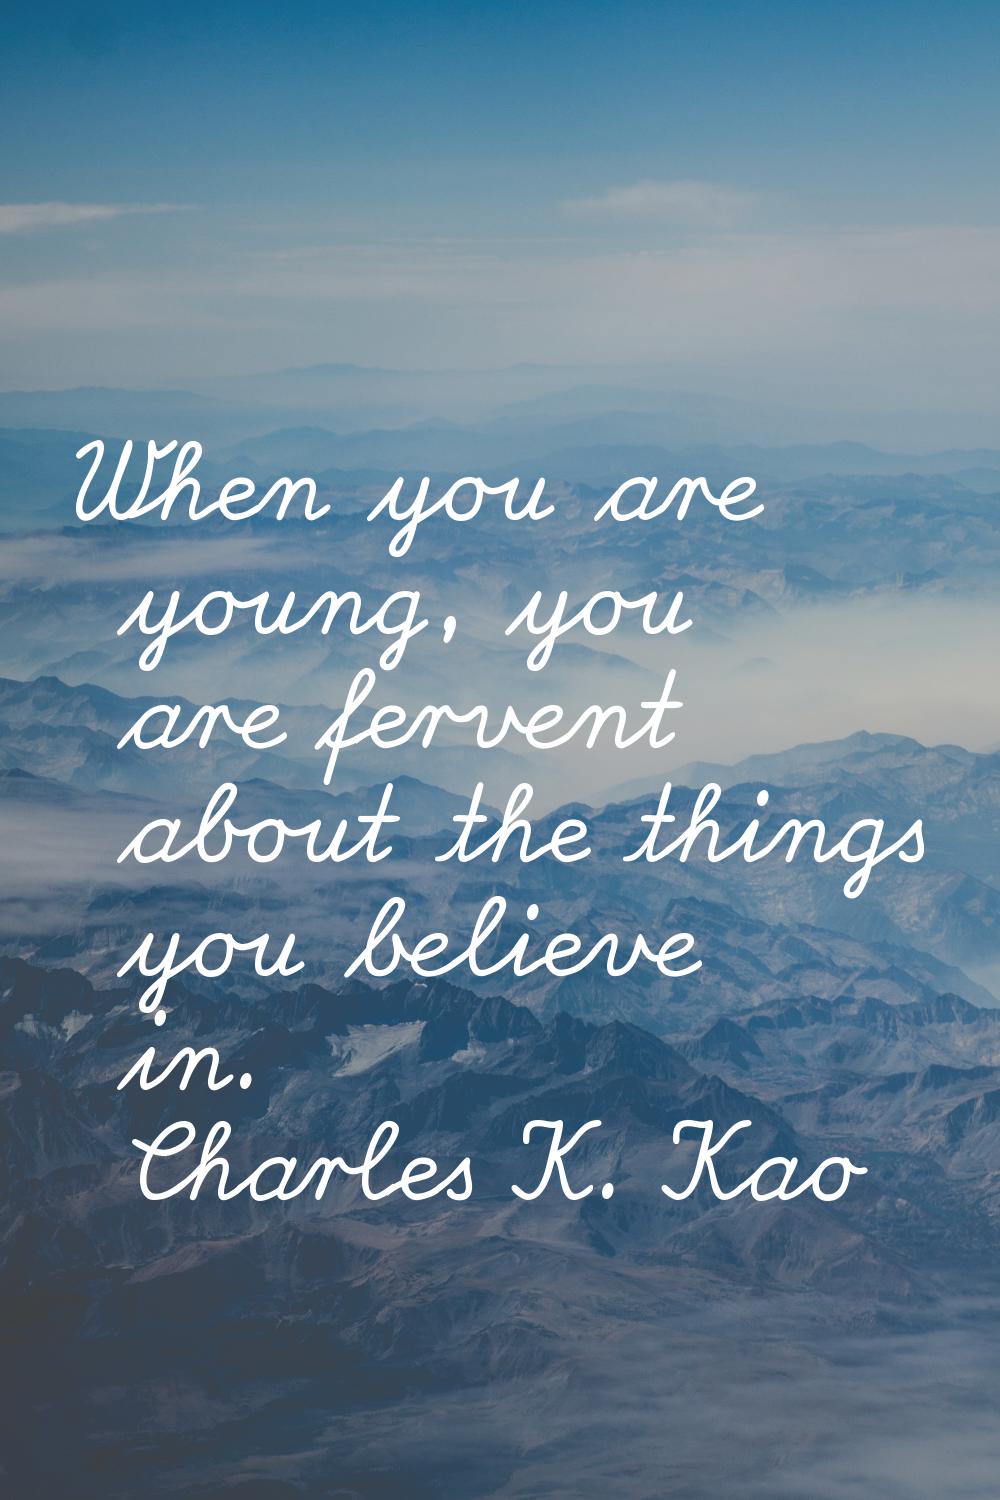 When you are young, you are fervent about the things you believe in.